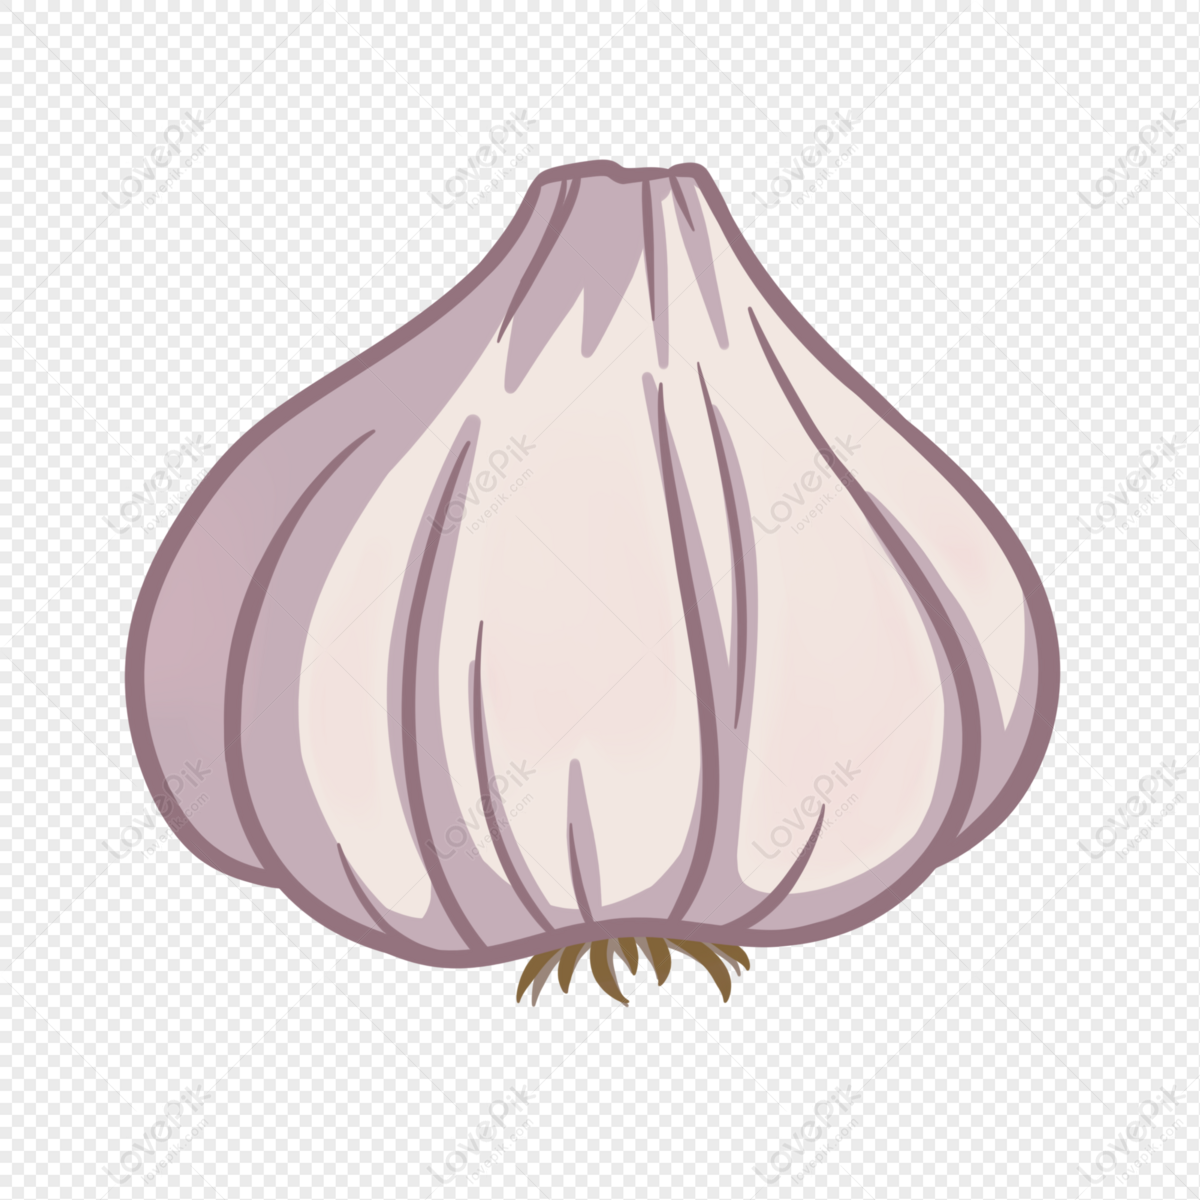 Garlic PNG Picture And Clipart Image For Free Download - Lovepik